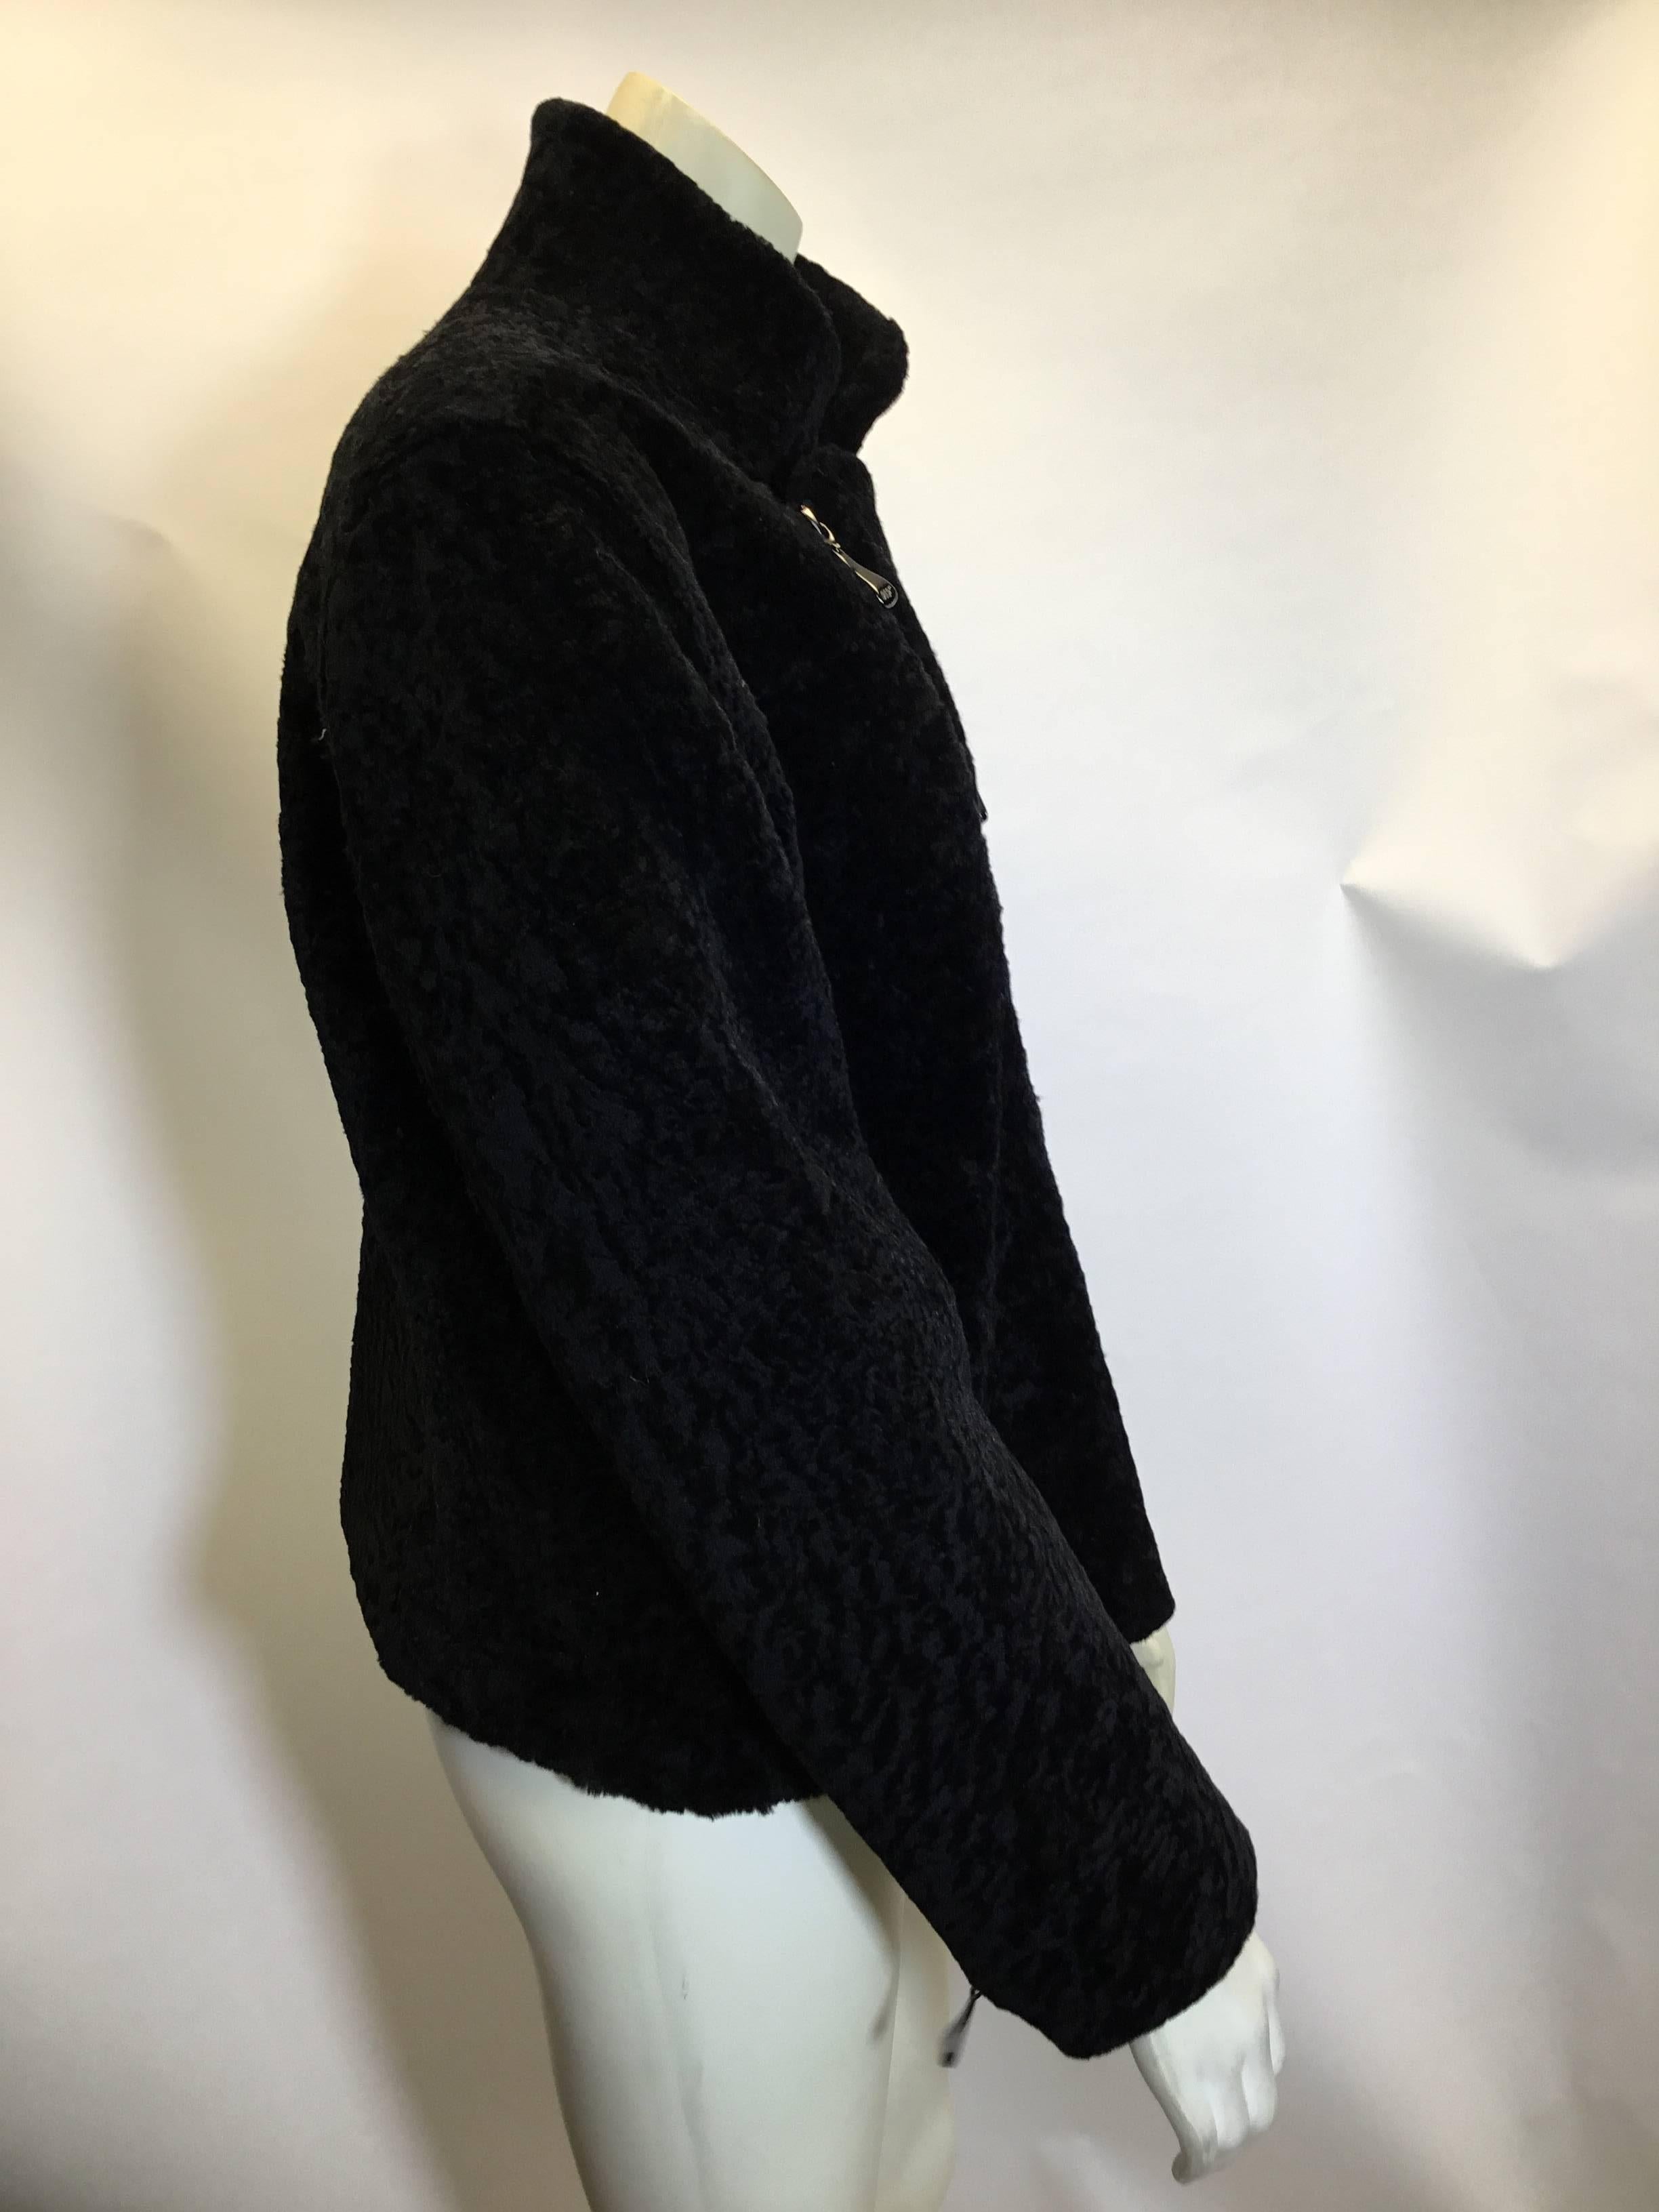 Belle Fare Black Moto Zip Coat In Excellent Condition For Sale In Narberth, PA